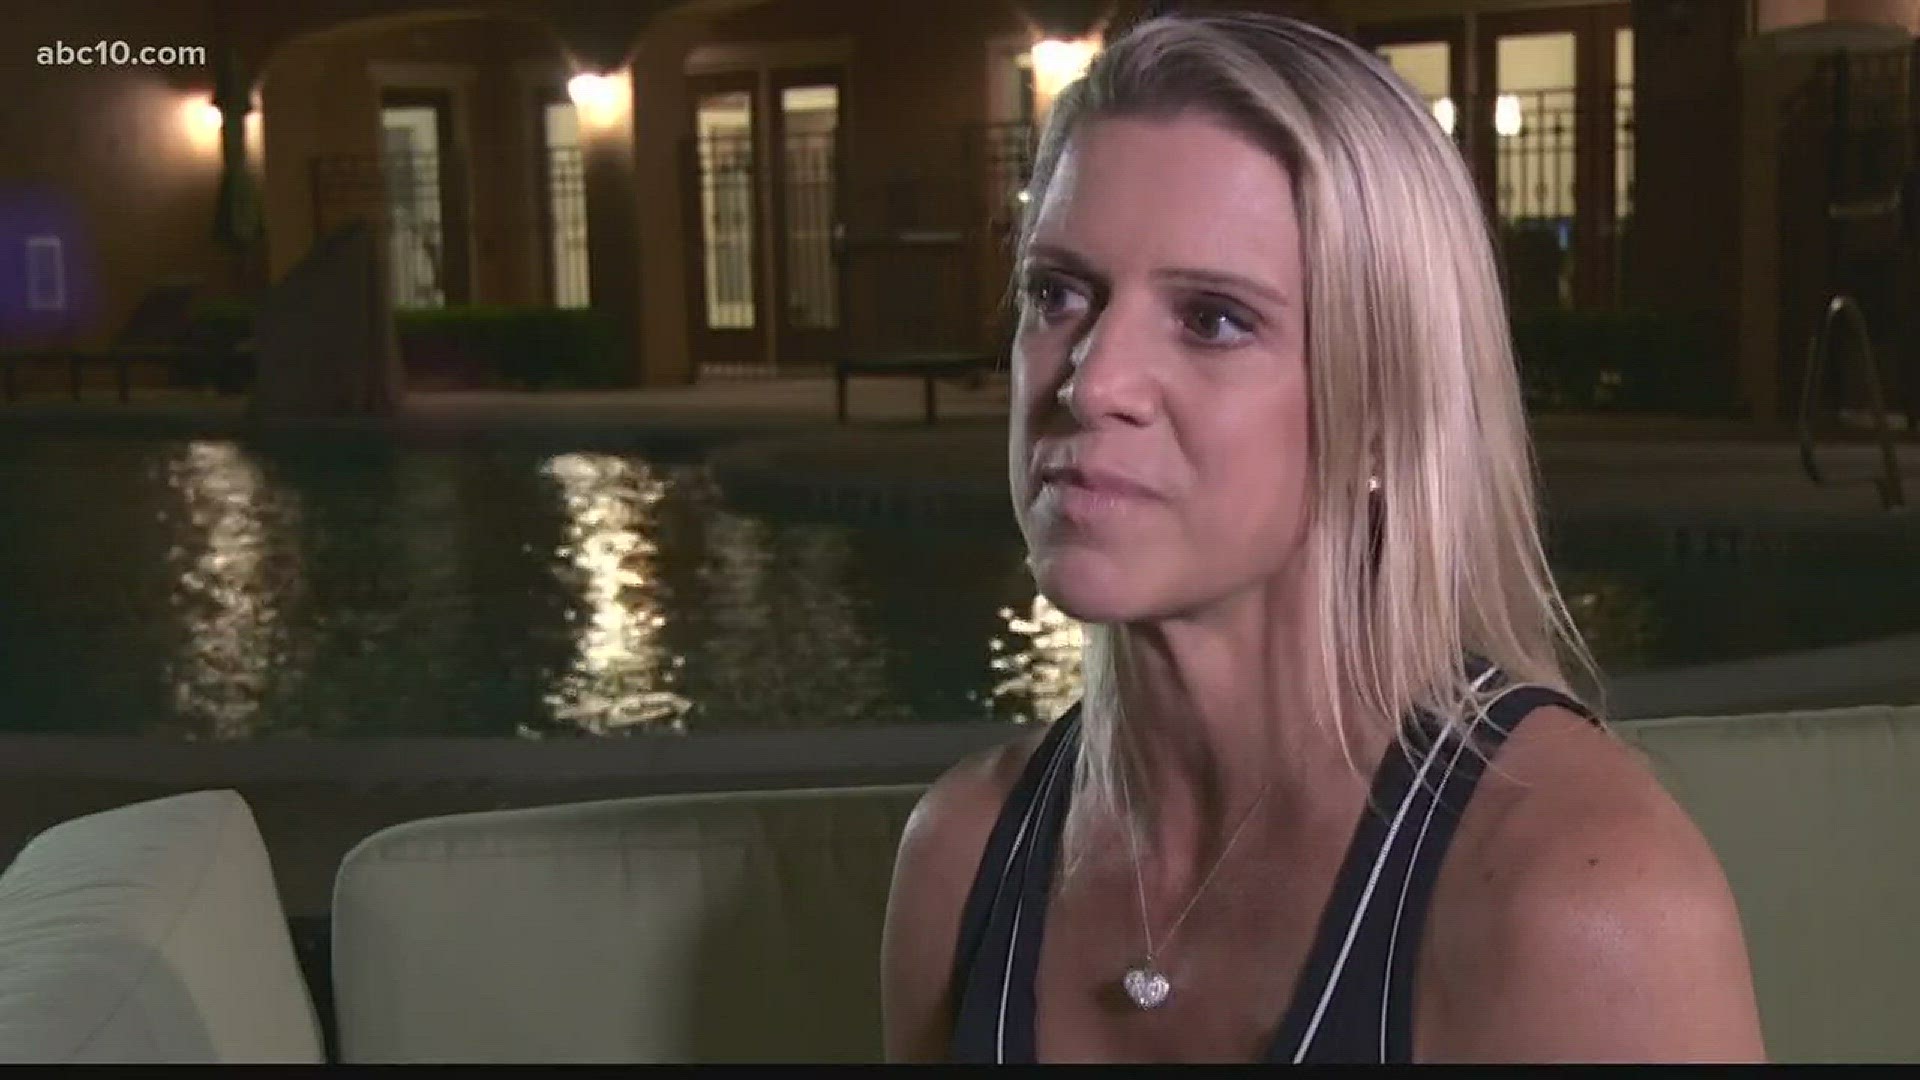 A local survivor of the Las Vegas shooting is channeling her grief towards helping victims.